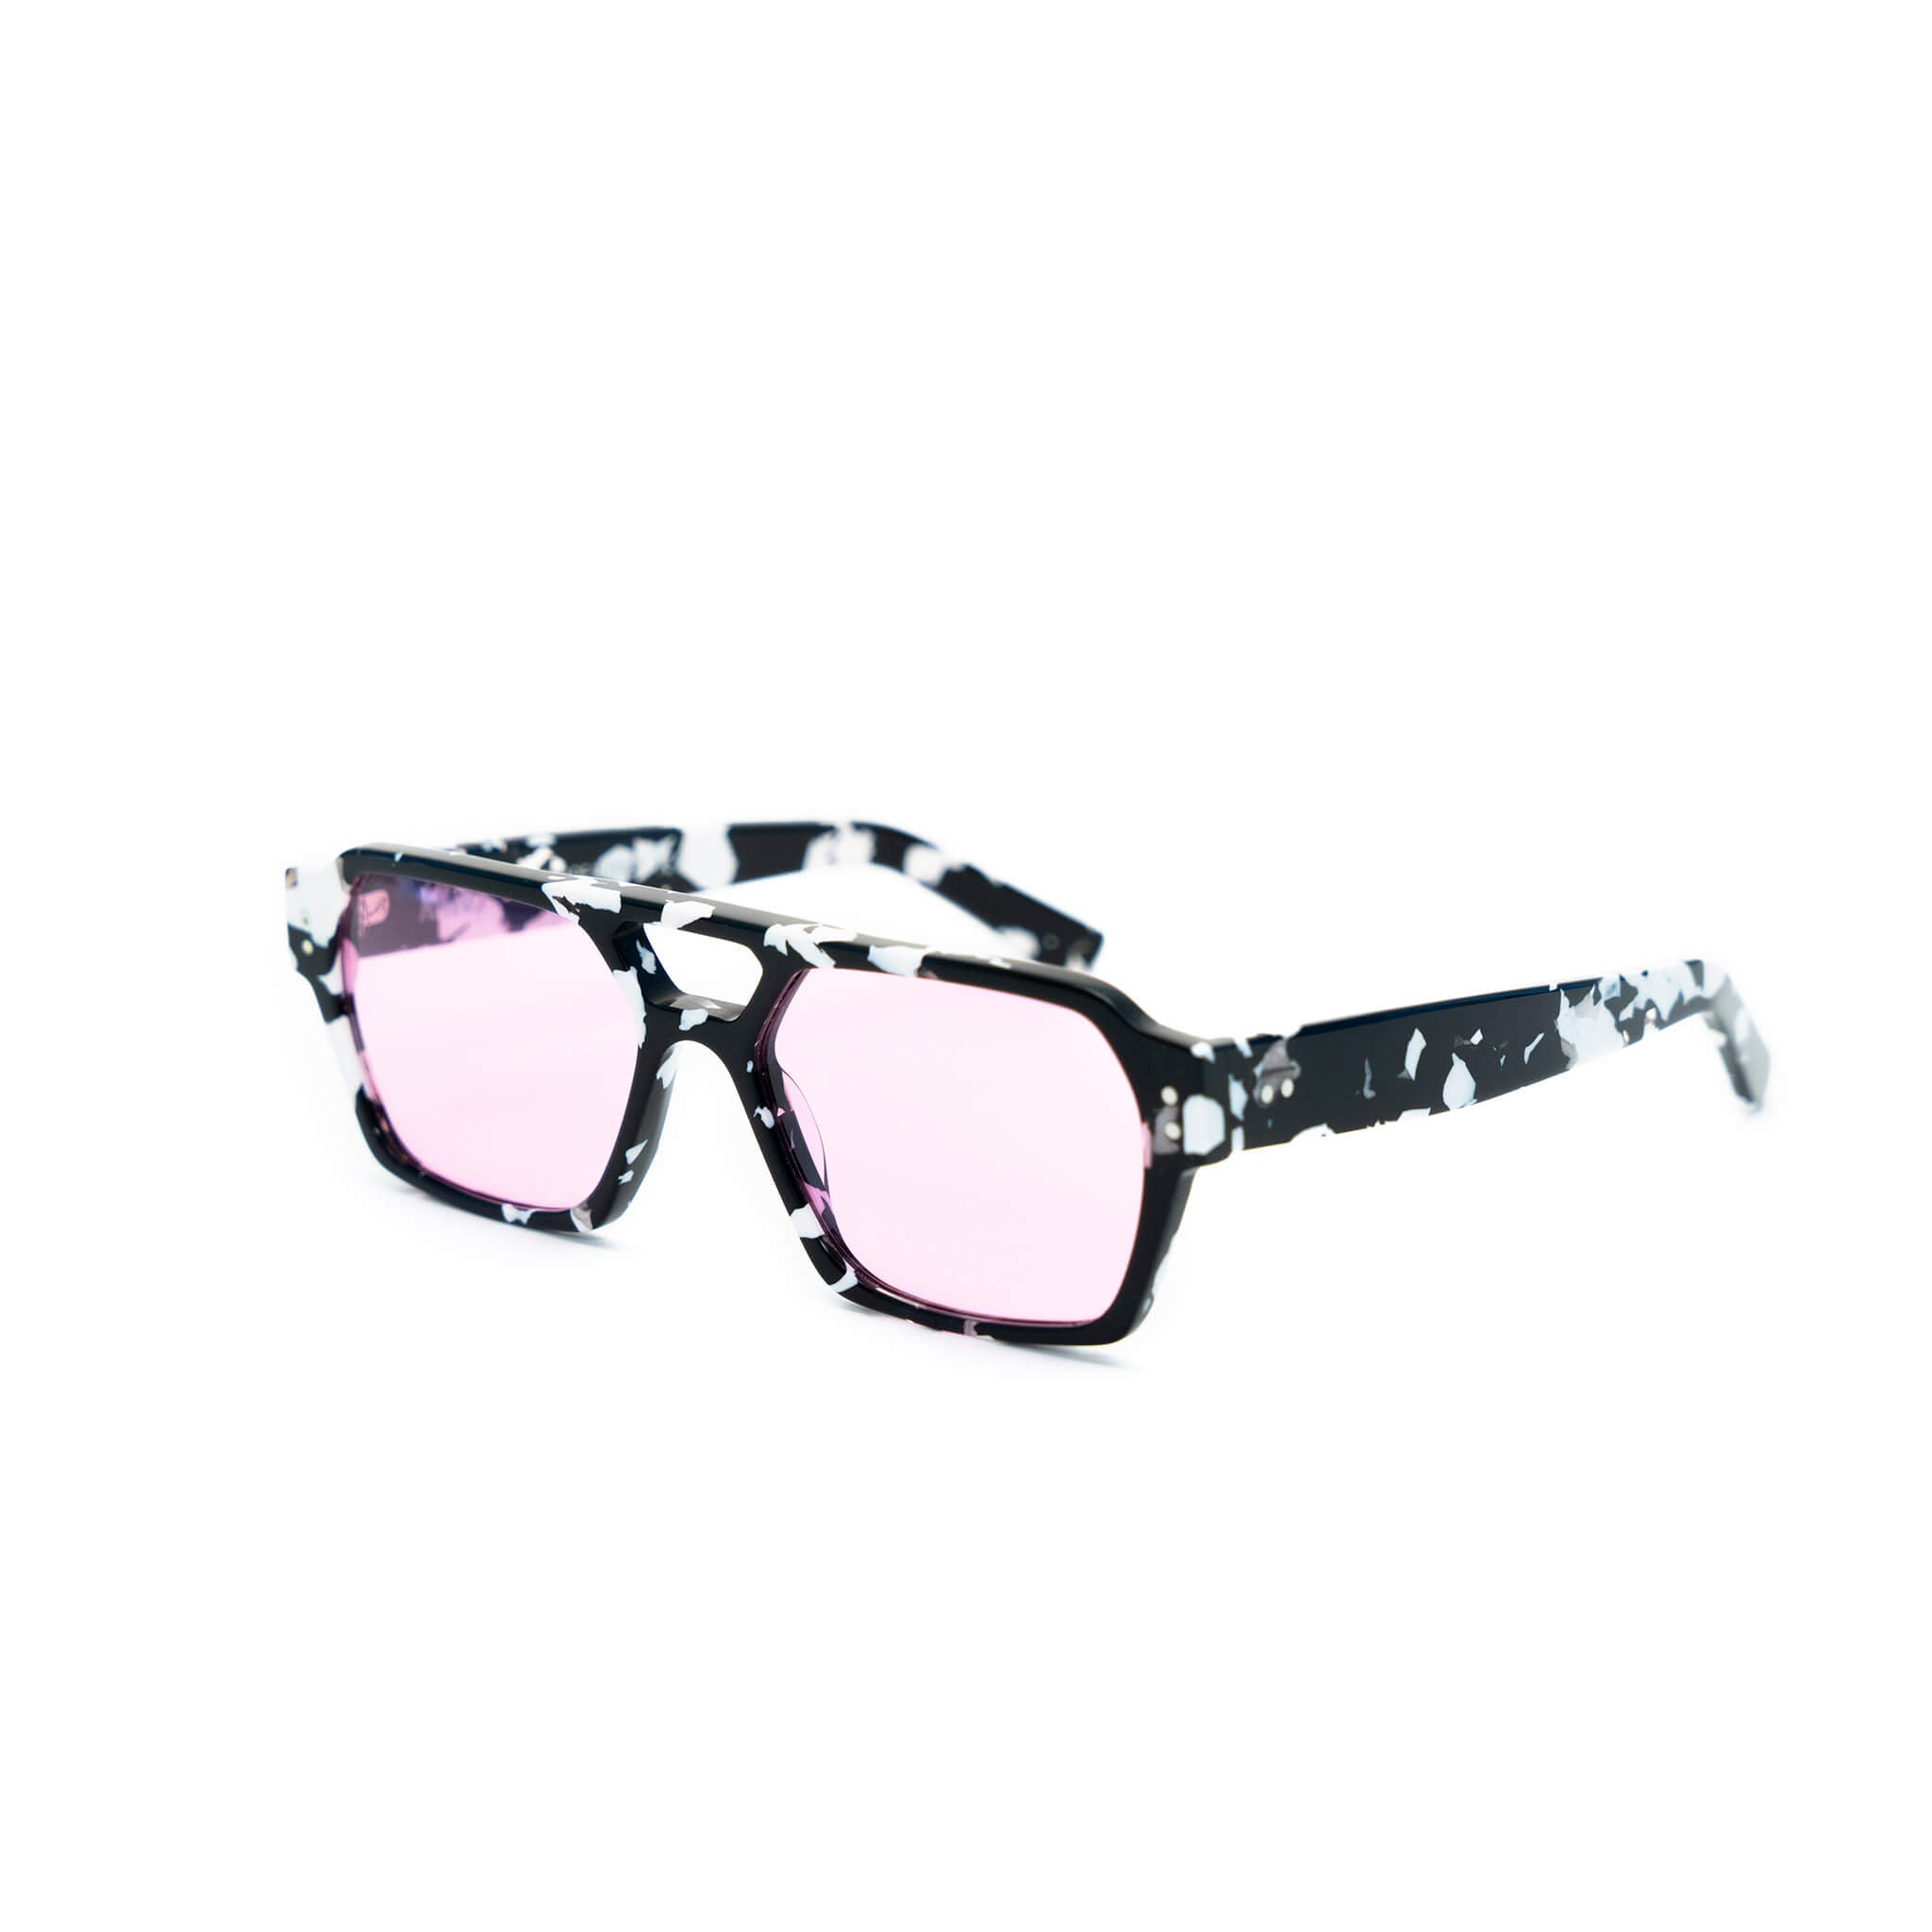 Ego sunglasses from Ameos in black & white and pink side angle